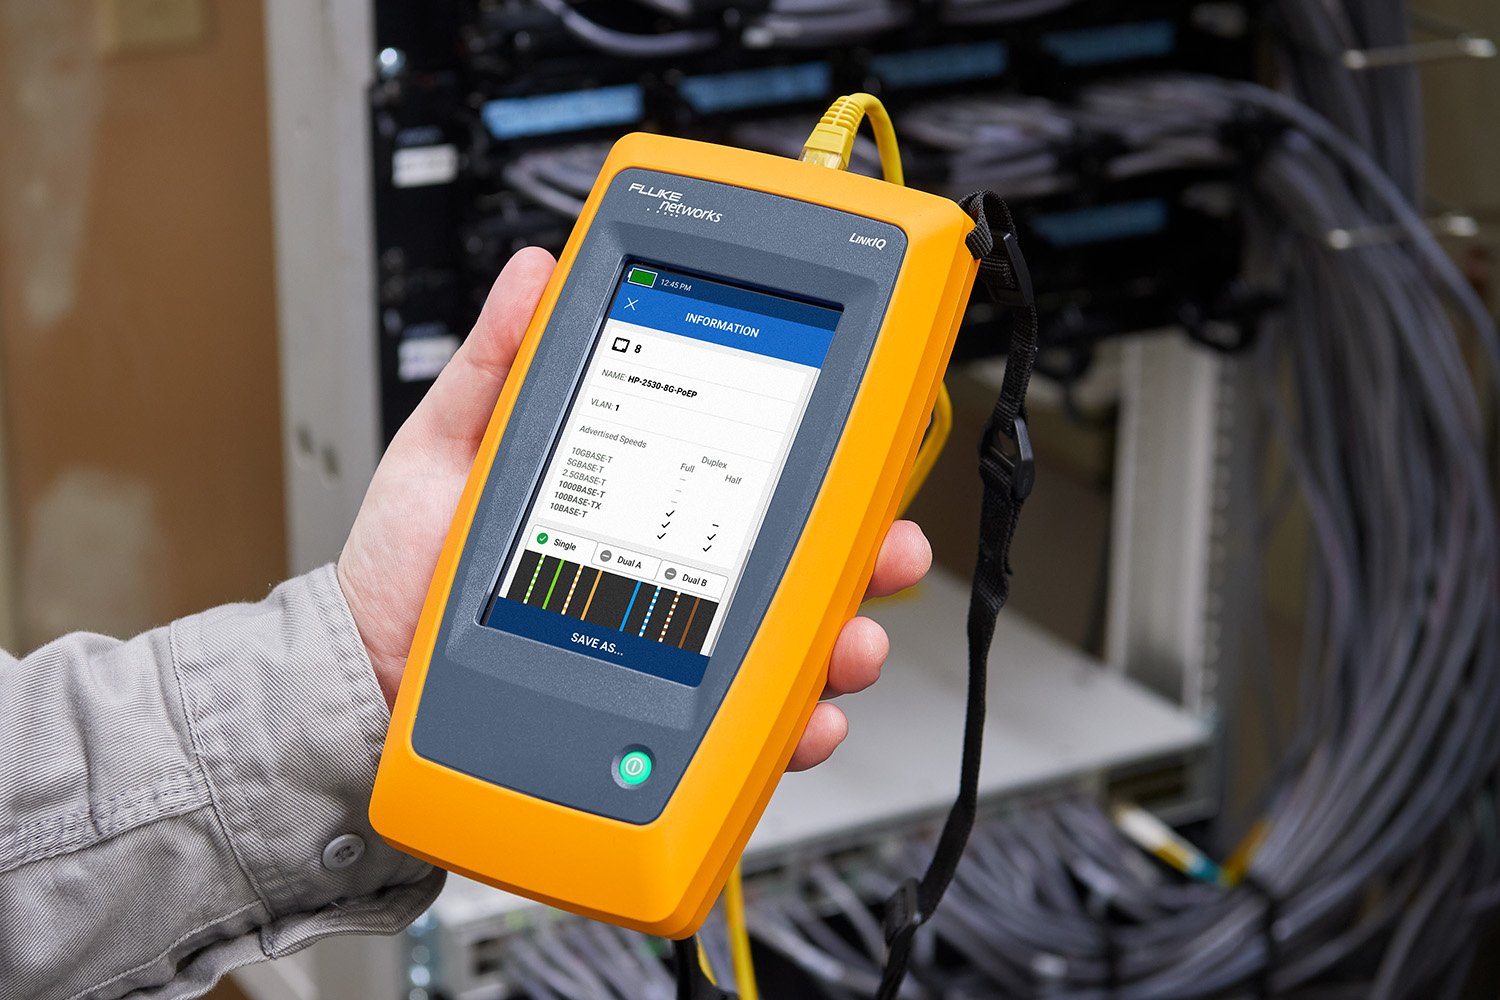 Technician’s hand holding a Fluke Networks LinkIQ in front of cable switches